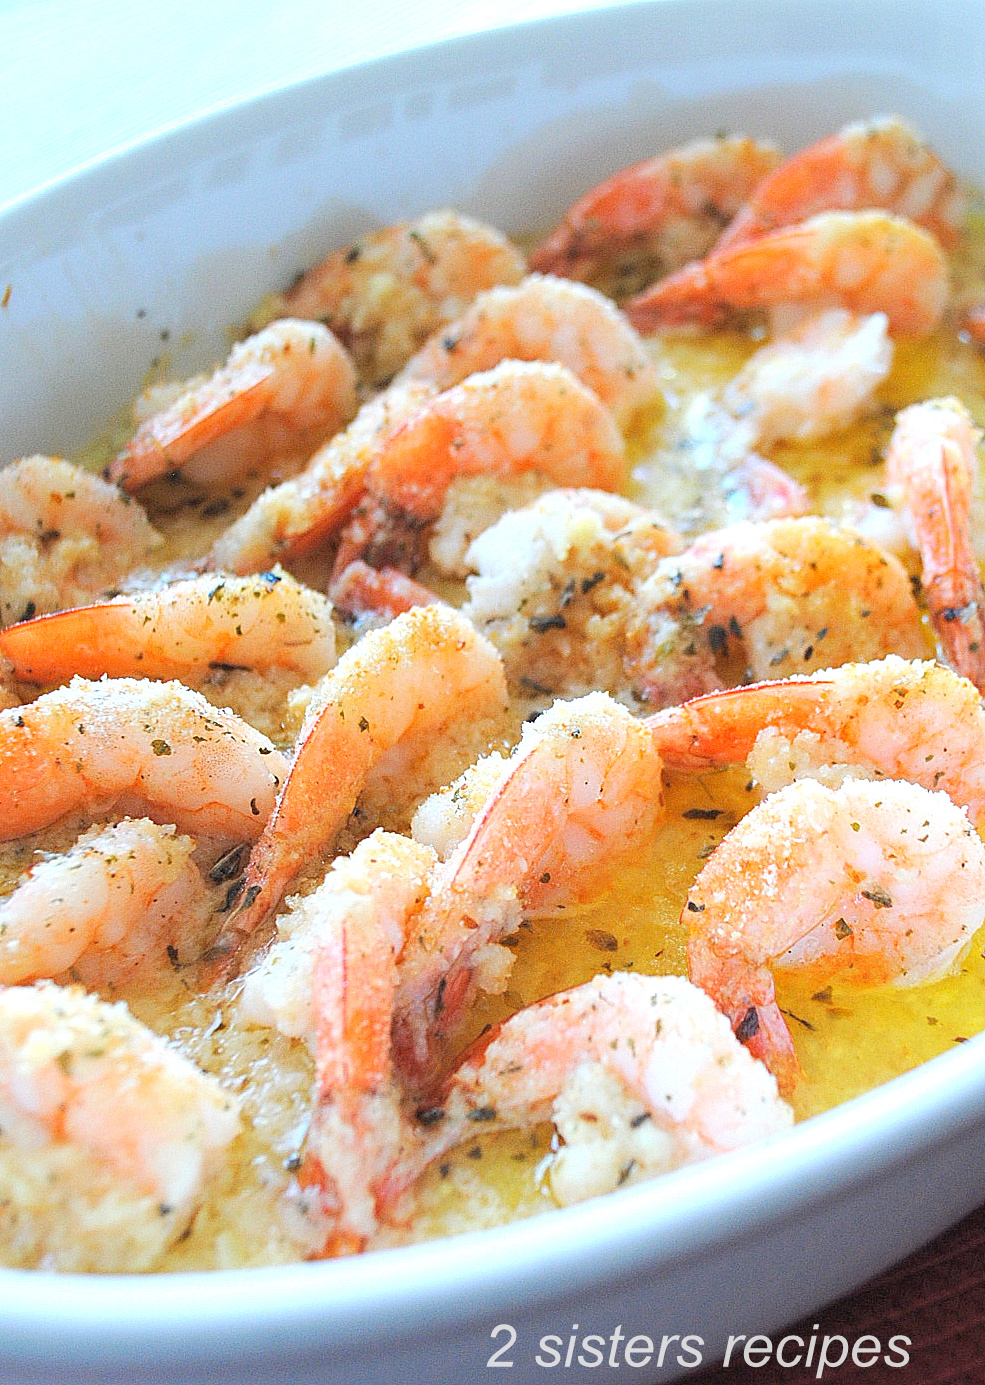 A white baking dish filled with cooked shrimp in a lemon sauce.